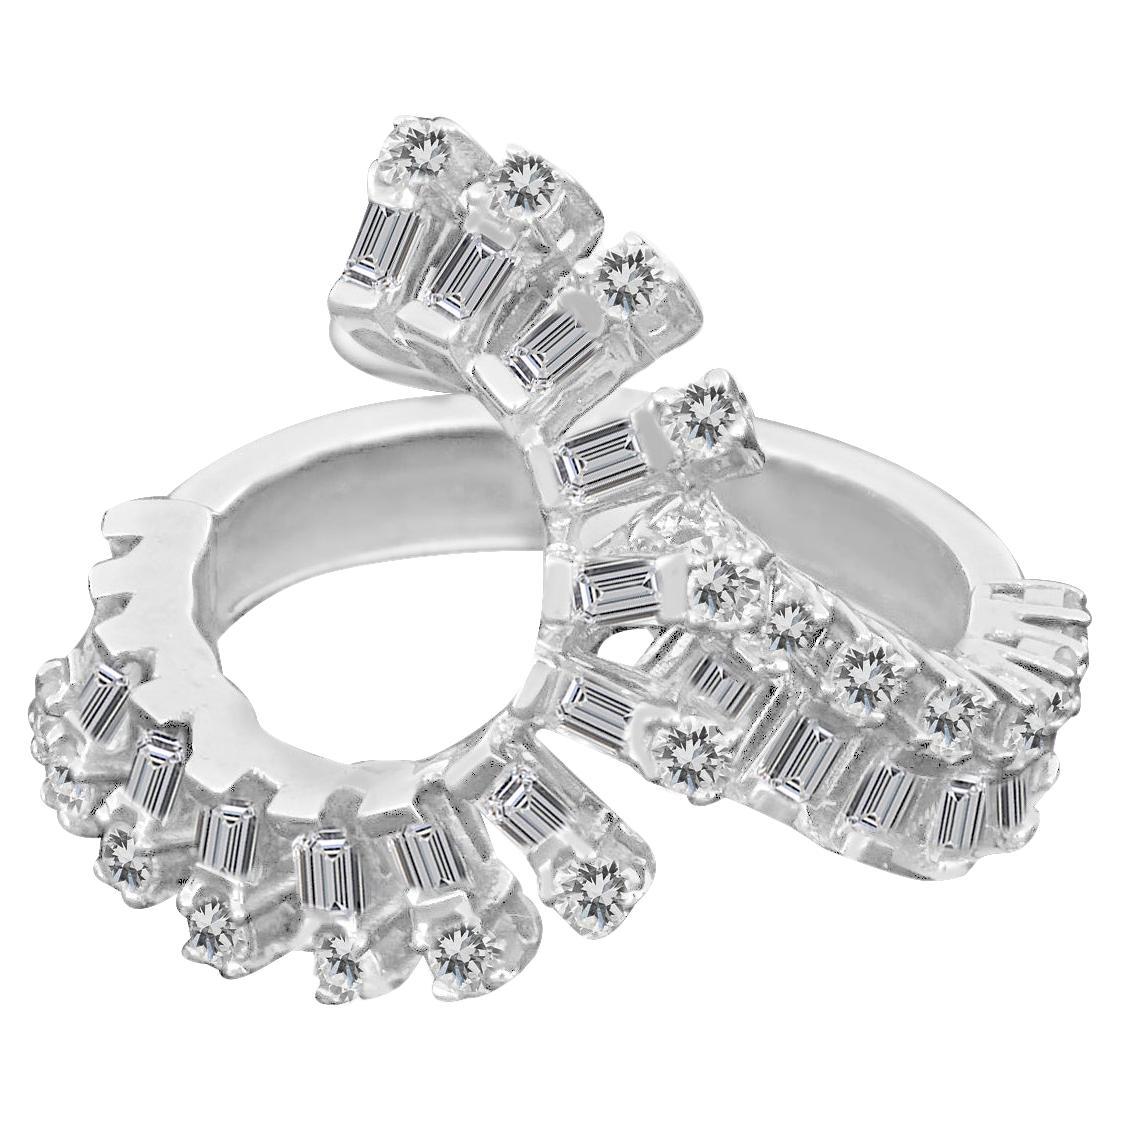 Amwaj 18 Karat White Gold Ring. Eclipse with Baguette and Round Cut Diamonds